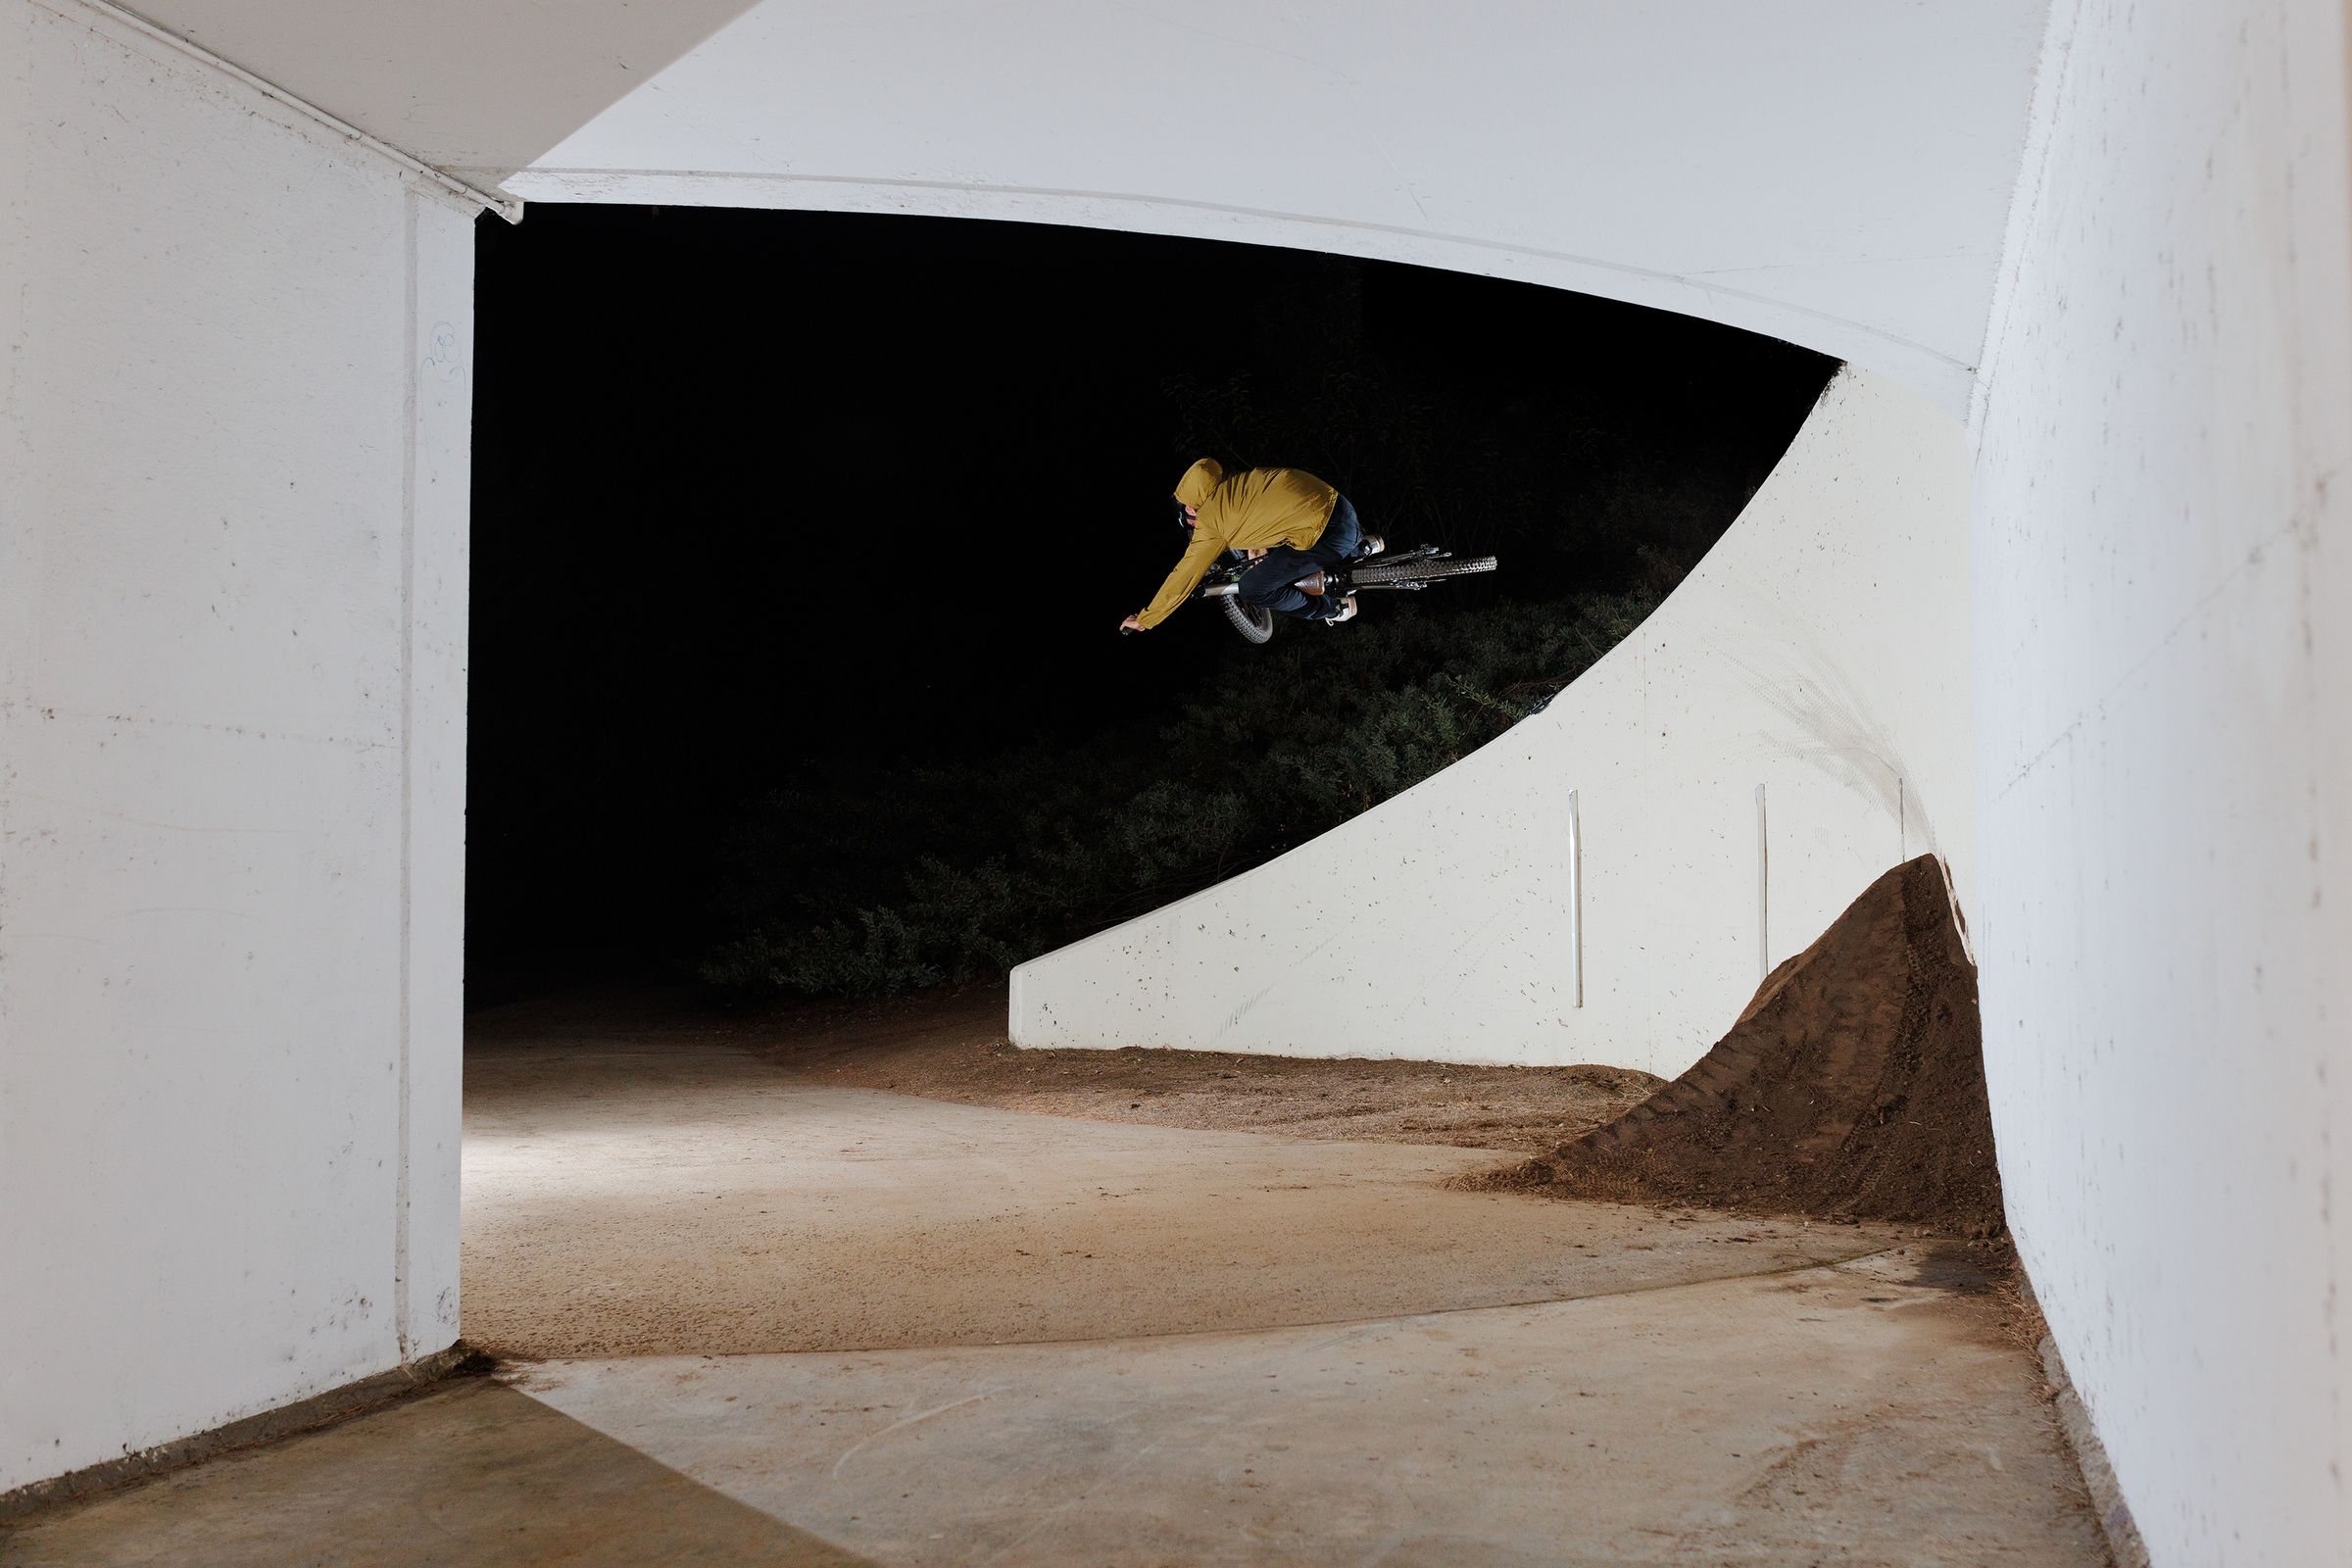 Image from Christian Rigal's High Vis MTB Video Project